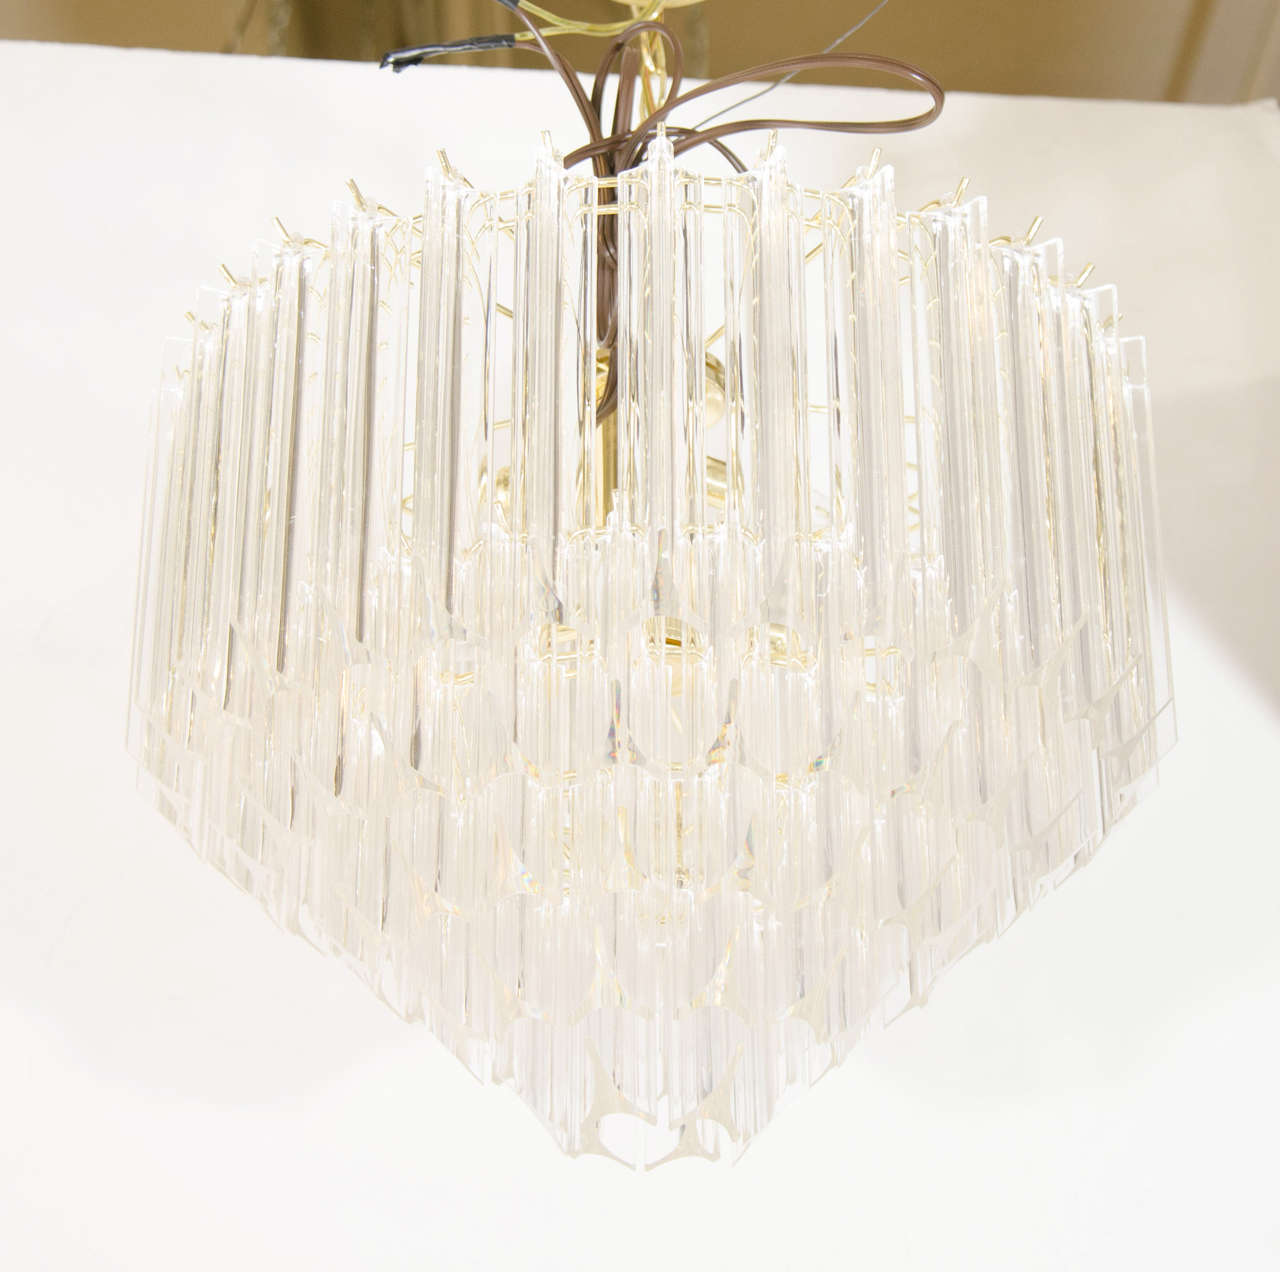 A vintage pair of five-tier chandeliers with Lucite rods suspended from a brass frame.

Good vintage condition with age appropriate wear

$1,150 EACH